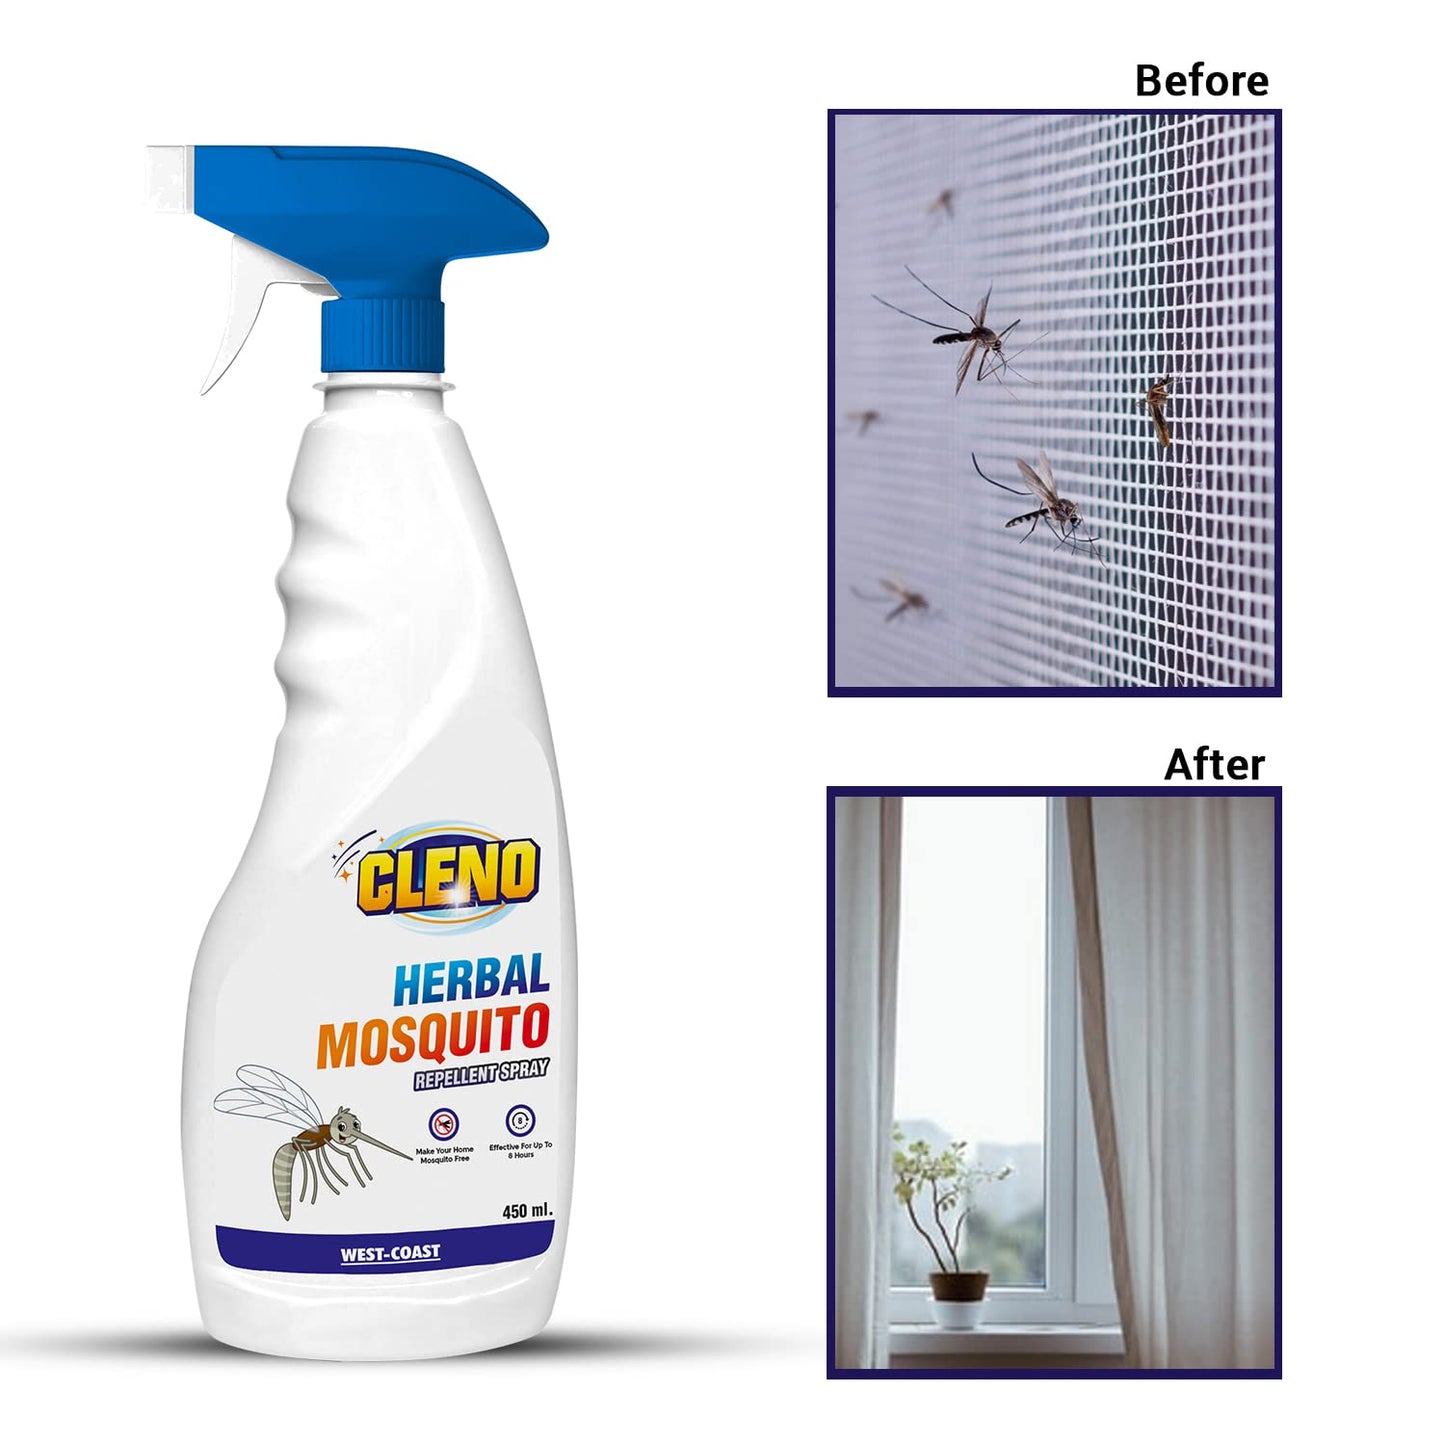 Cleno Herbal Mosquitoes Repellent Spray  Mosquitoes Room Spray  Completely Herbal  Mosquito Repellent Spray  Irritant-Free Chemical-Free Baby-Safe Skin-Safe  450ml Pack of 2 Ready to Use